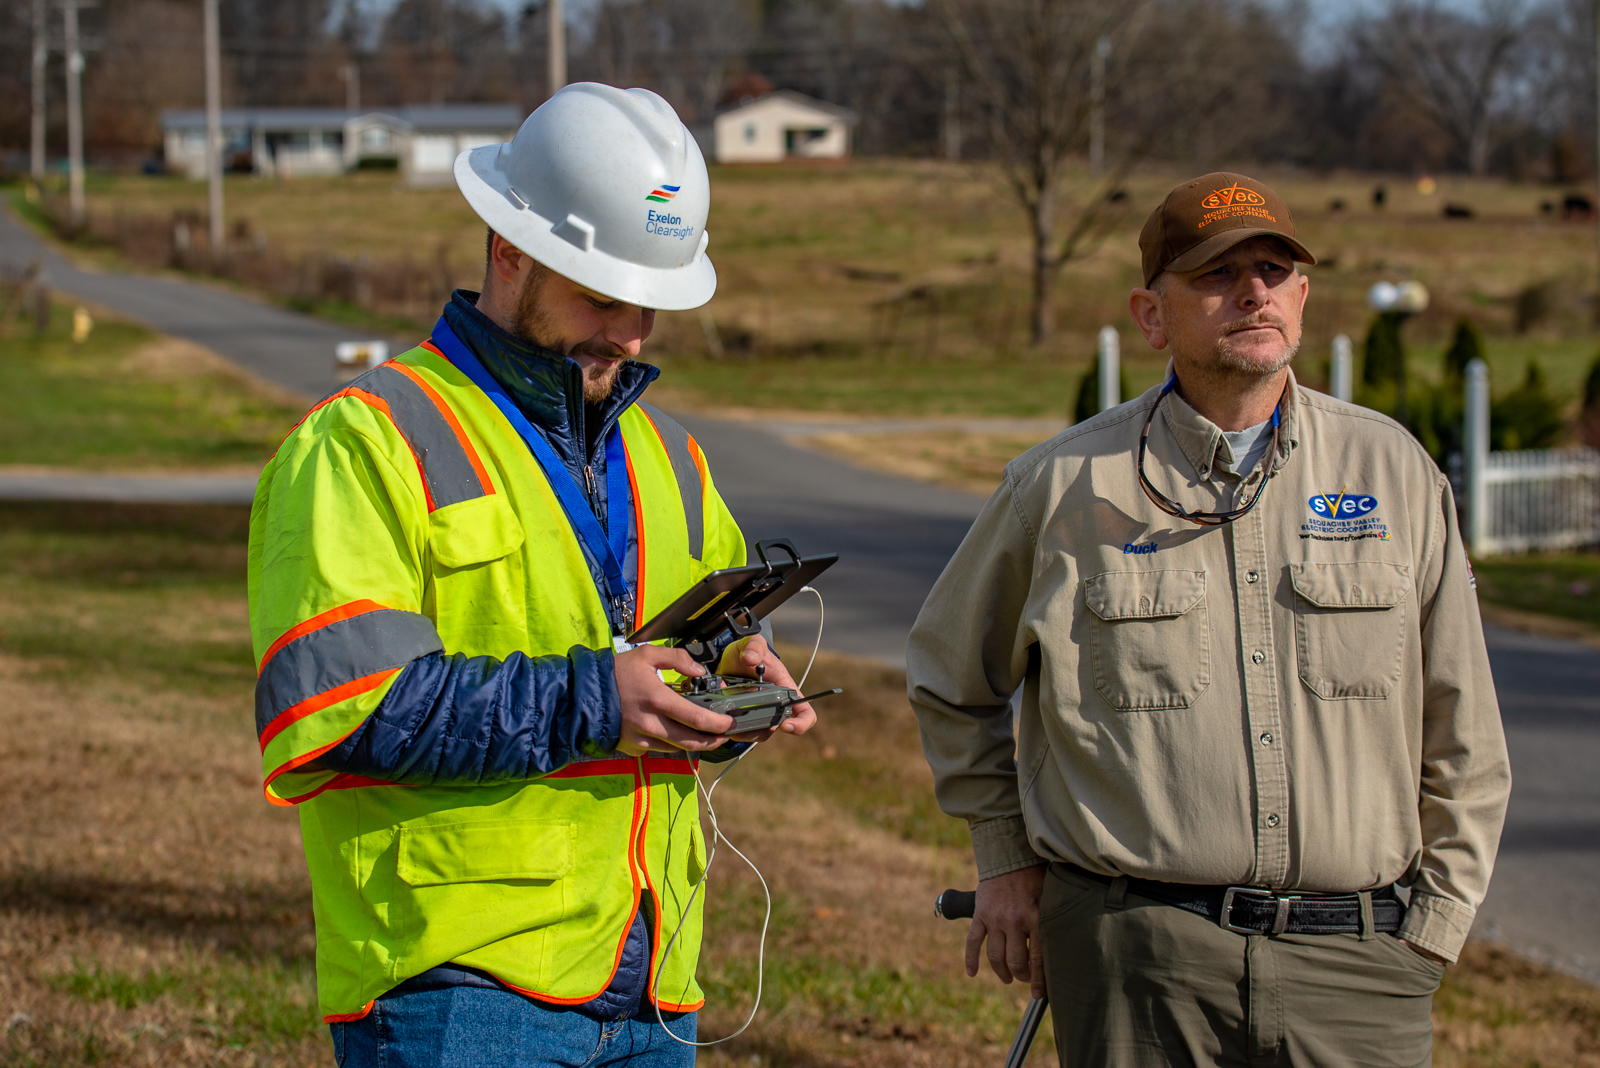 Safety Coordinator, Donnie Cooper and drone pilot flying drones for pole coverage.